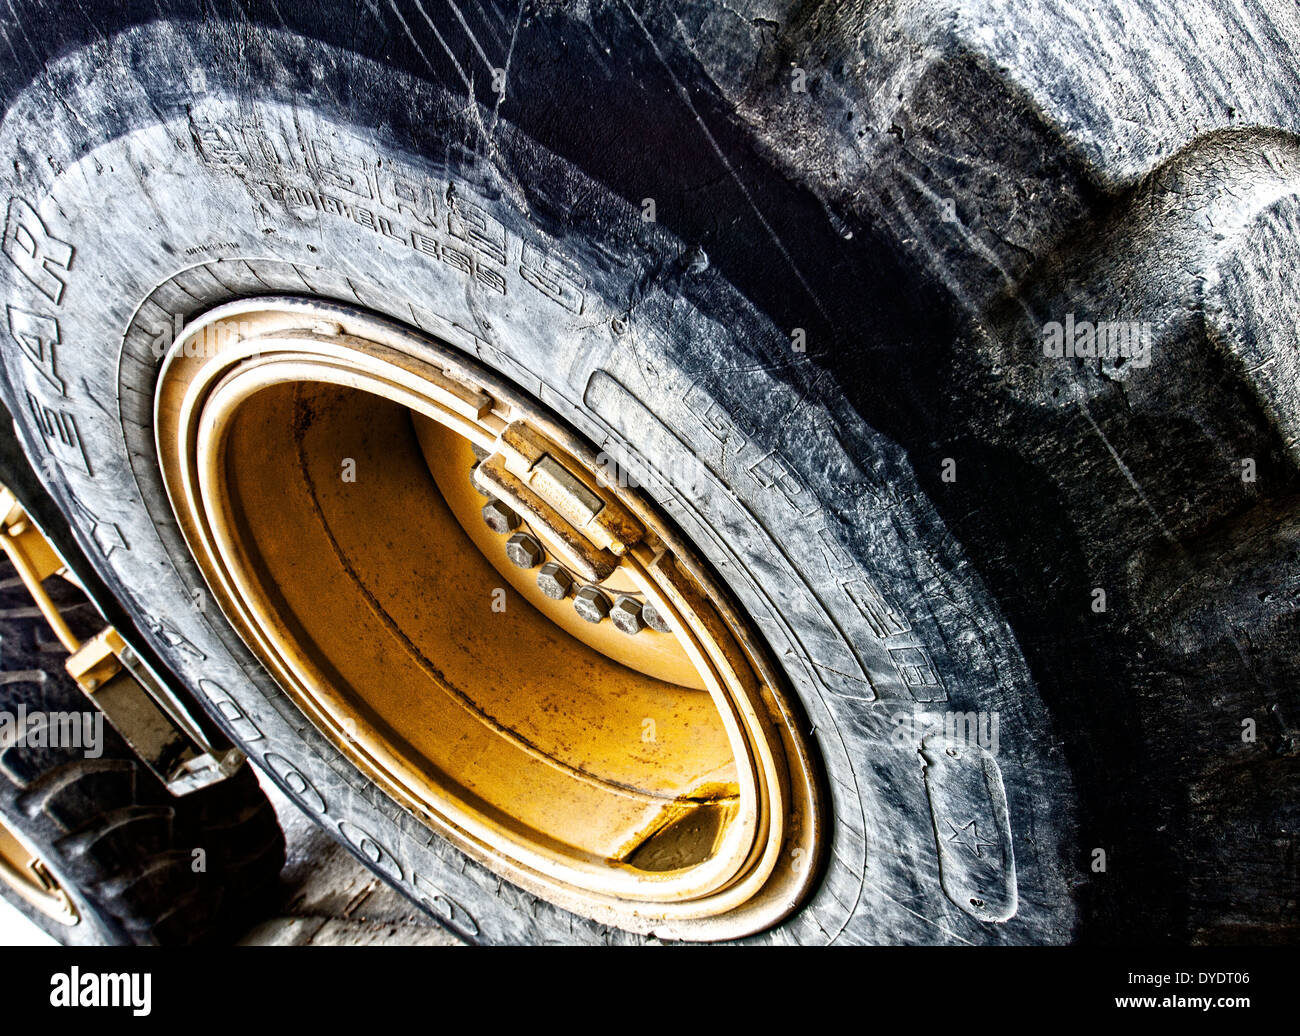 Closeup of the giant tires and wheels on a bulldozer showing dirt and wear and tear on the treads Stock Photo